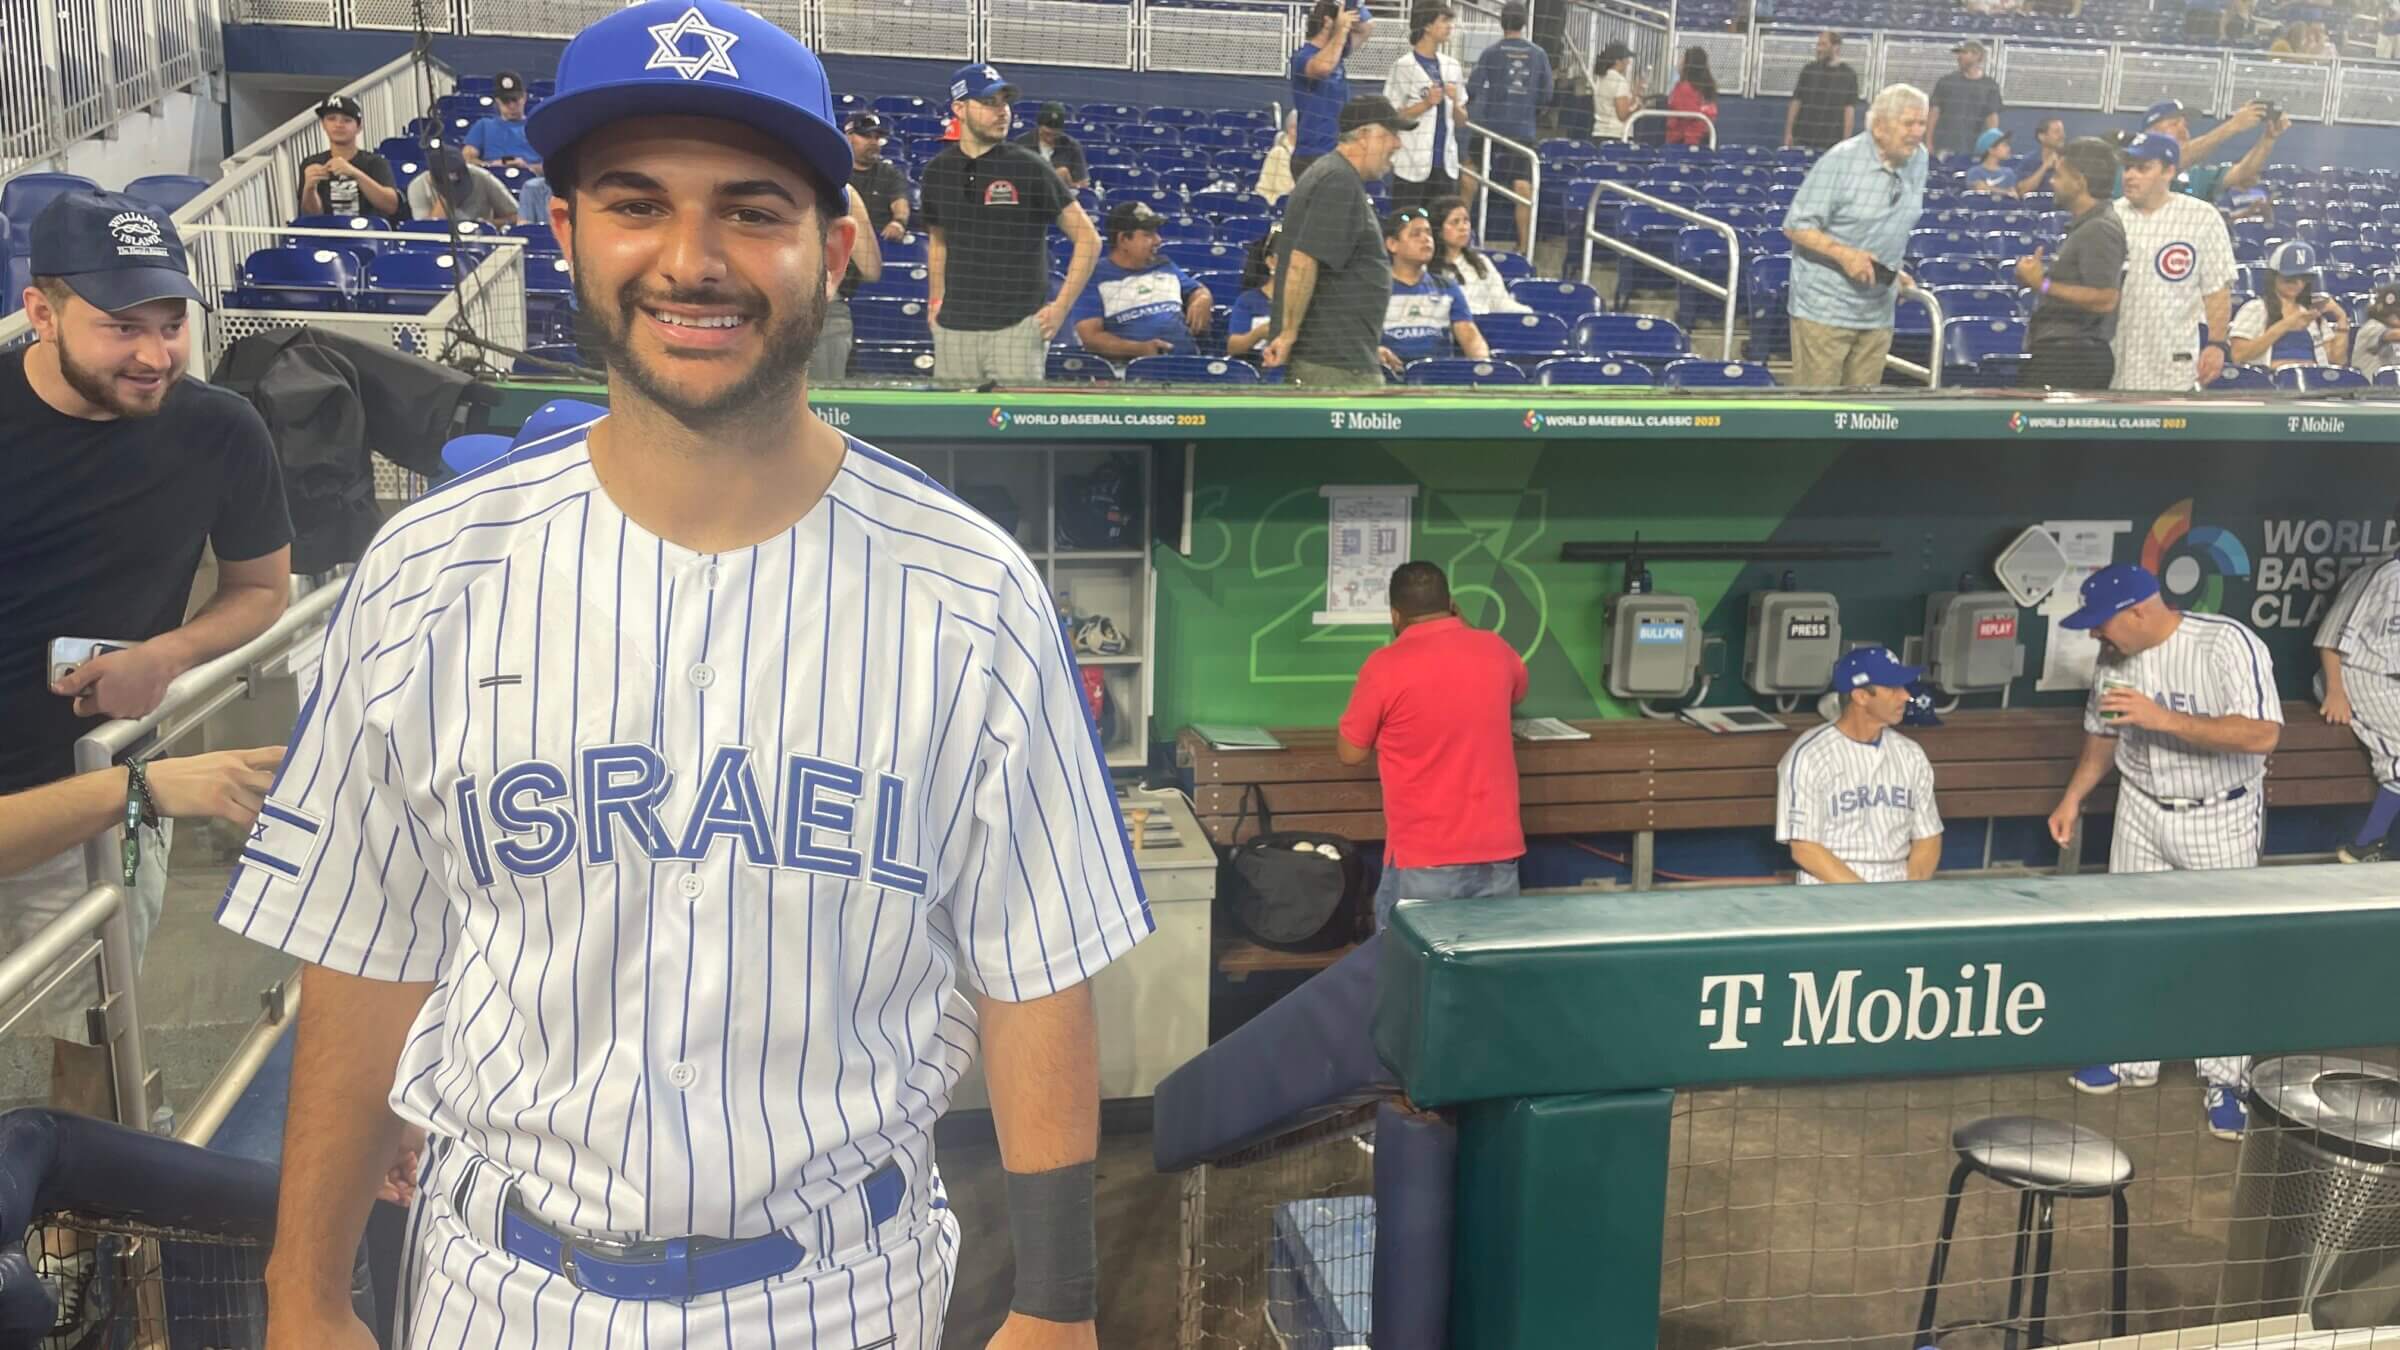 Tal Erel came up in the Israeli Association of Baseball. Now he's serving as Team Israel's bullpen catcher at the World Baseball Classic.